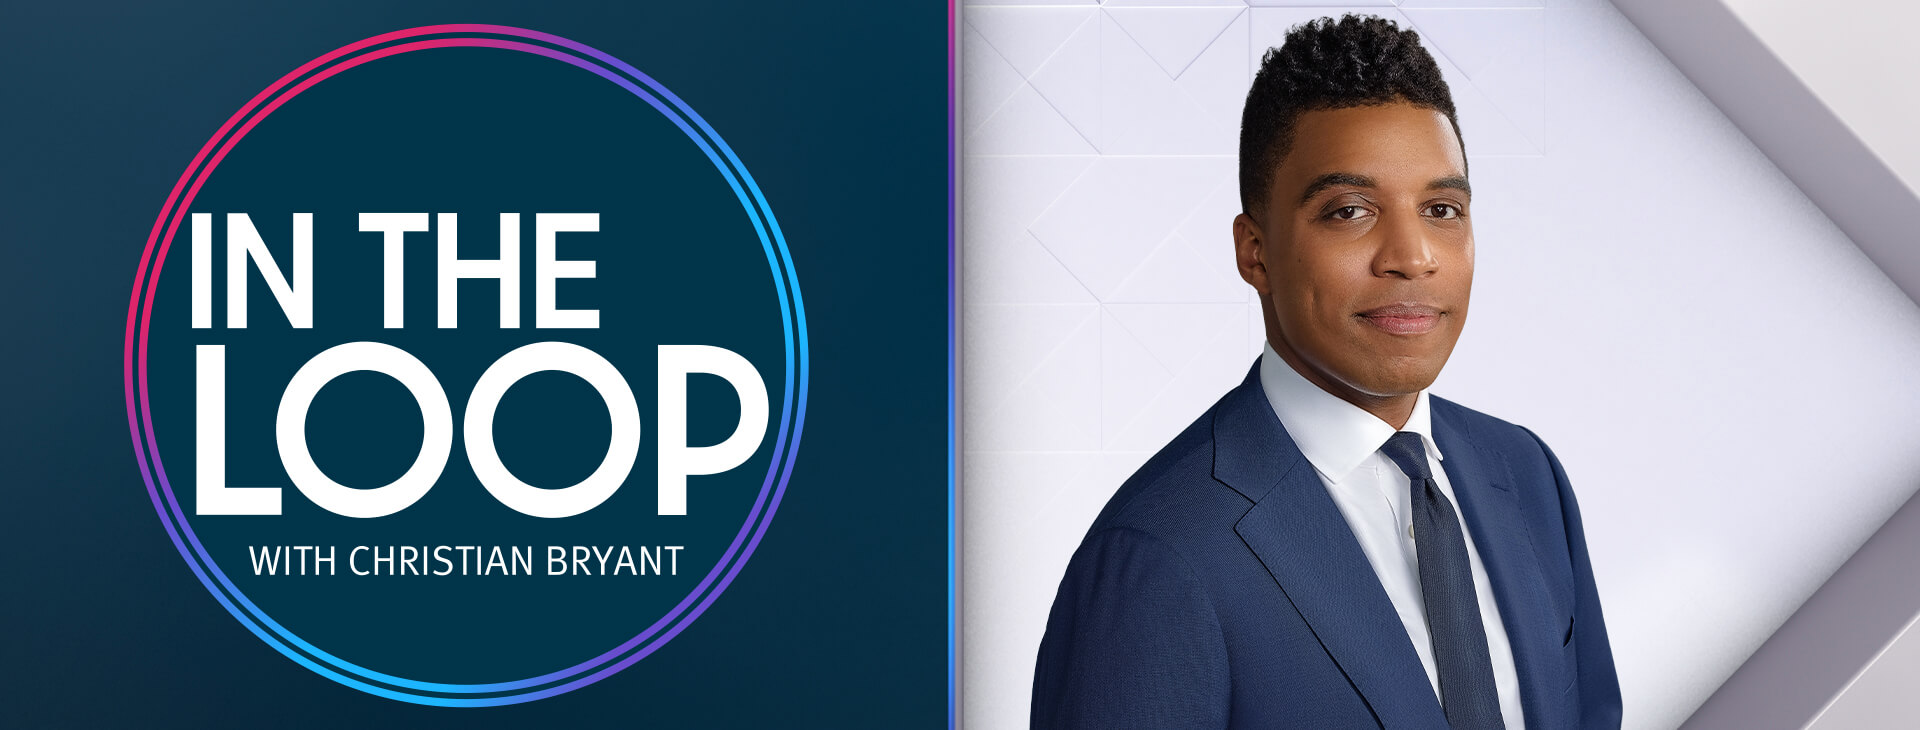 In the Loop show logo